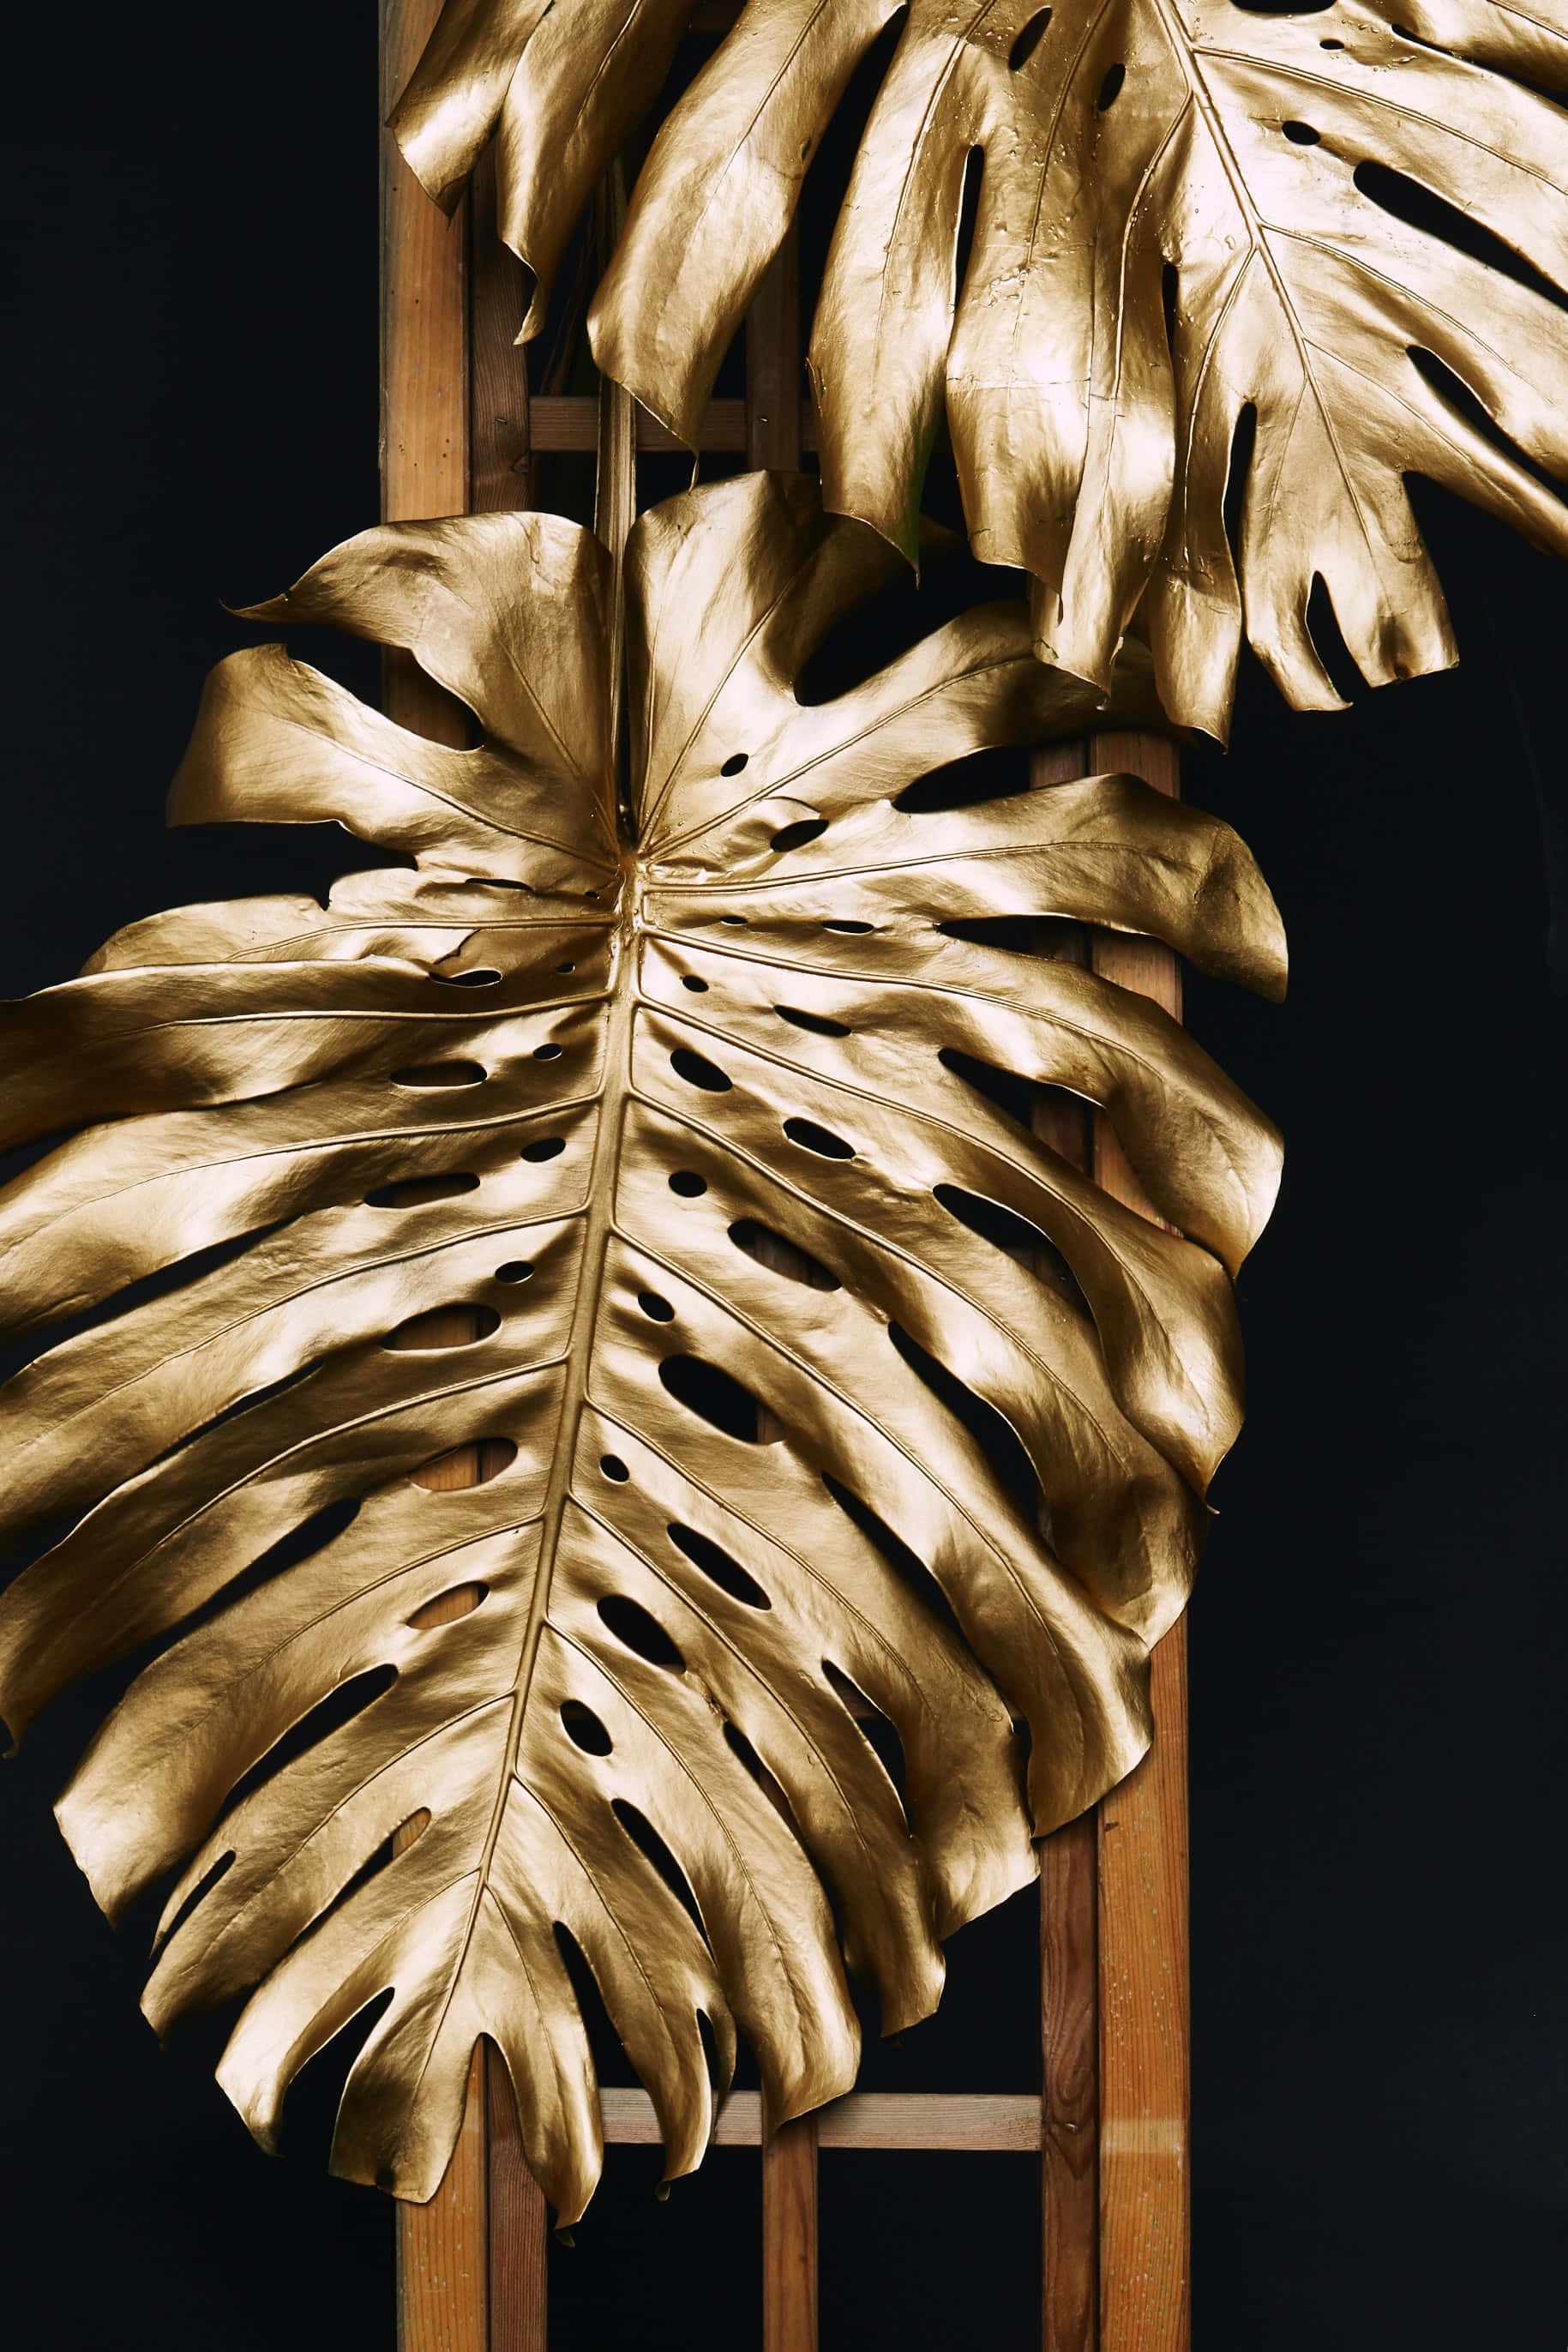 Two Gold Leaves On A Wooden Ladder